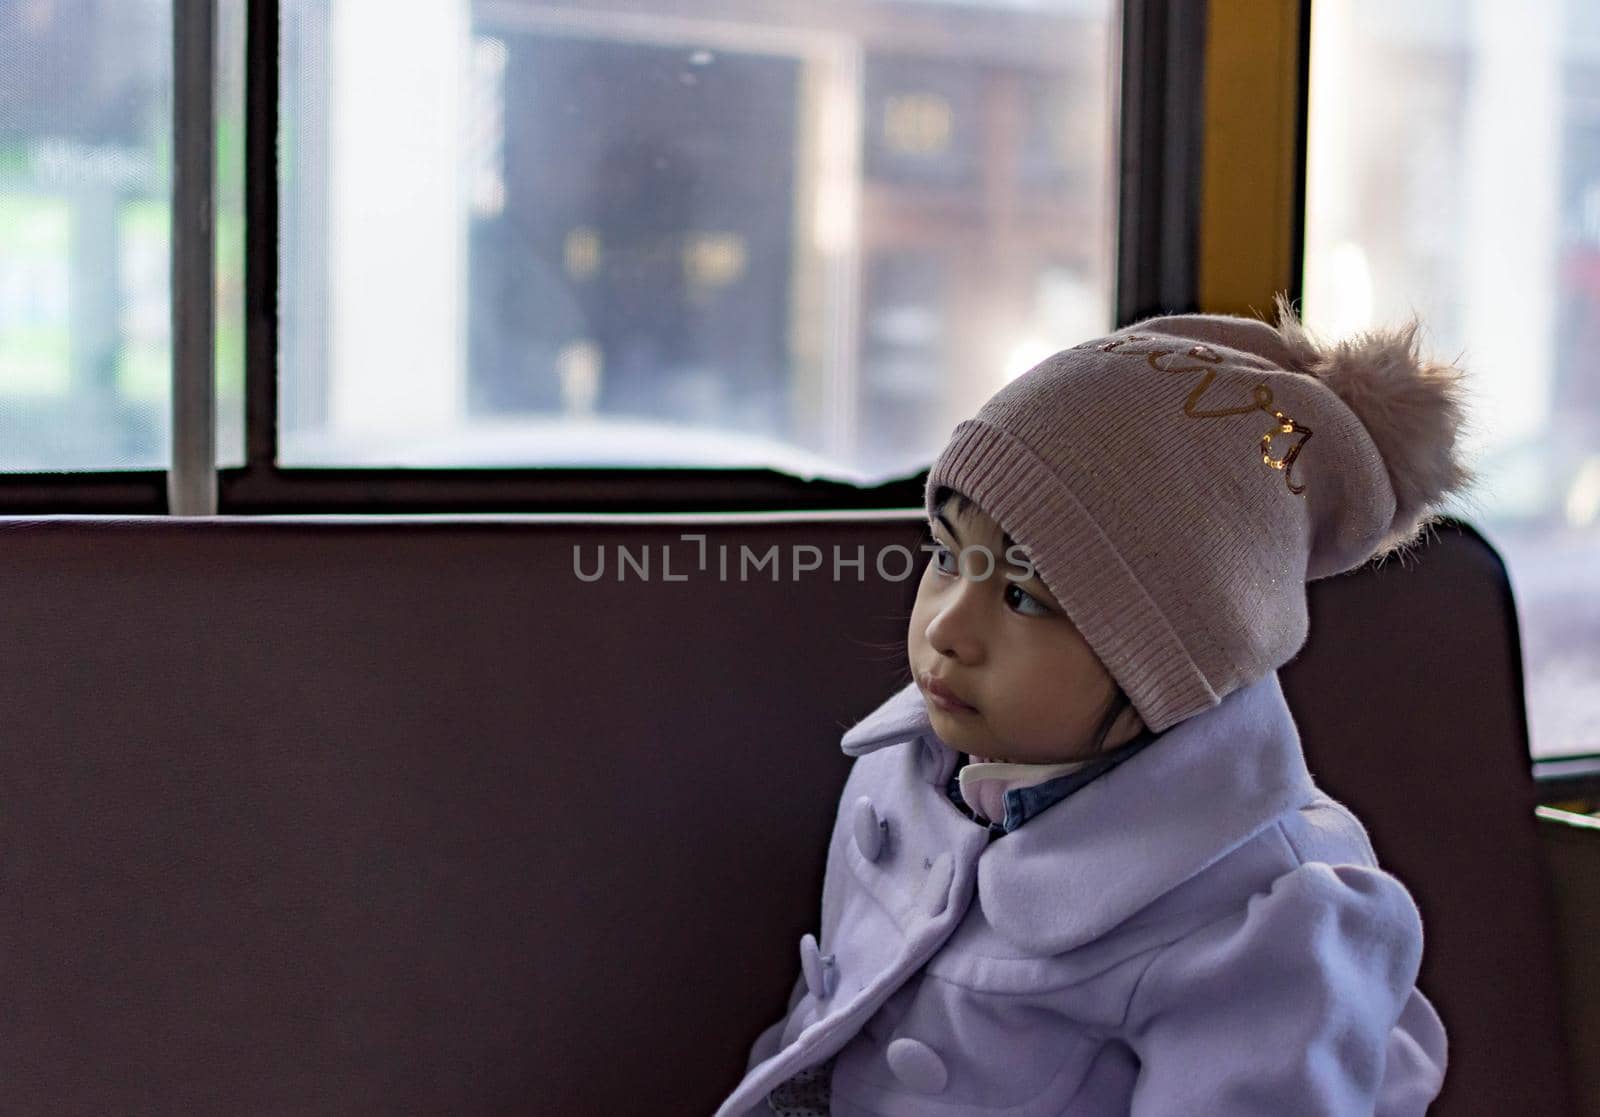 pretty female child wearing purple coat and cute bonnet while sitting inside a bus and enjoying the view from the window